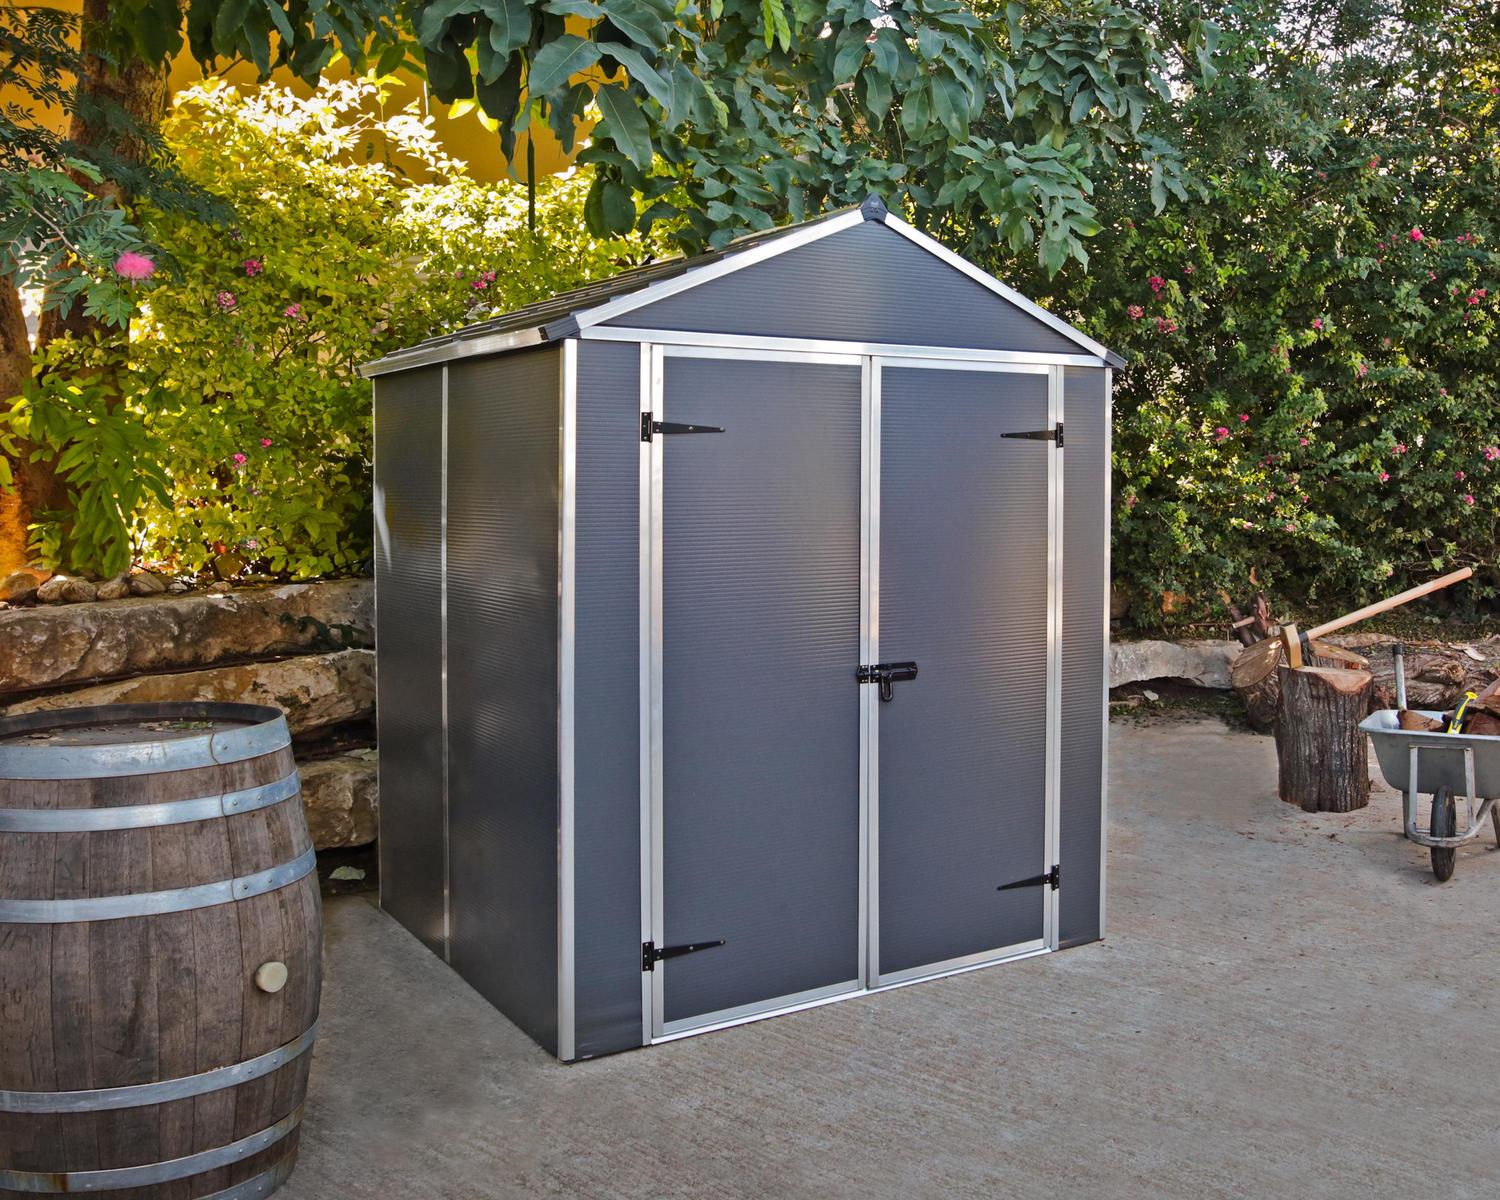 Garden Plastic Shed Rubicon 6 ft. x 5 ft. with Dark Grey Polycarbonate Multiwall &amp; Aluminium Frame